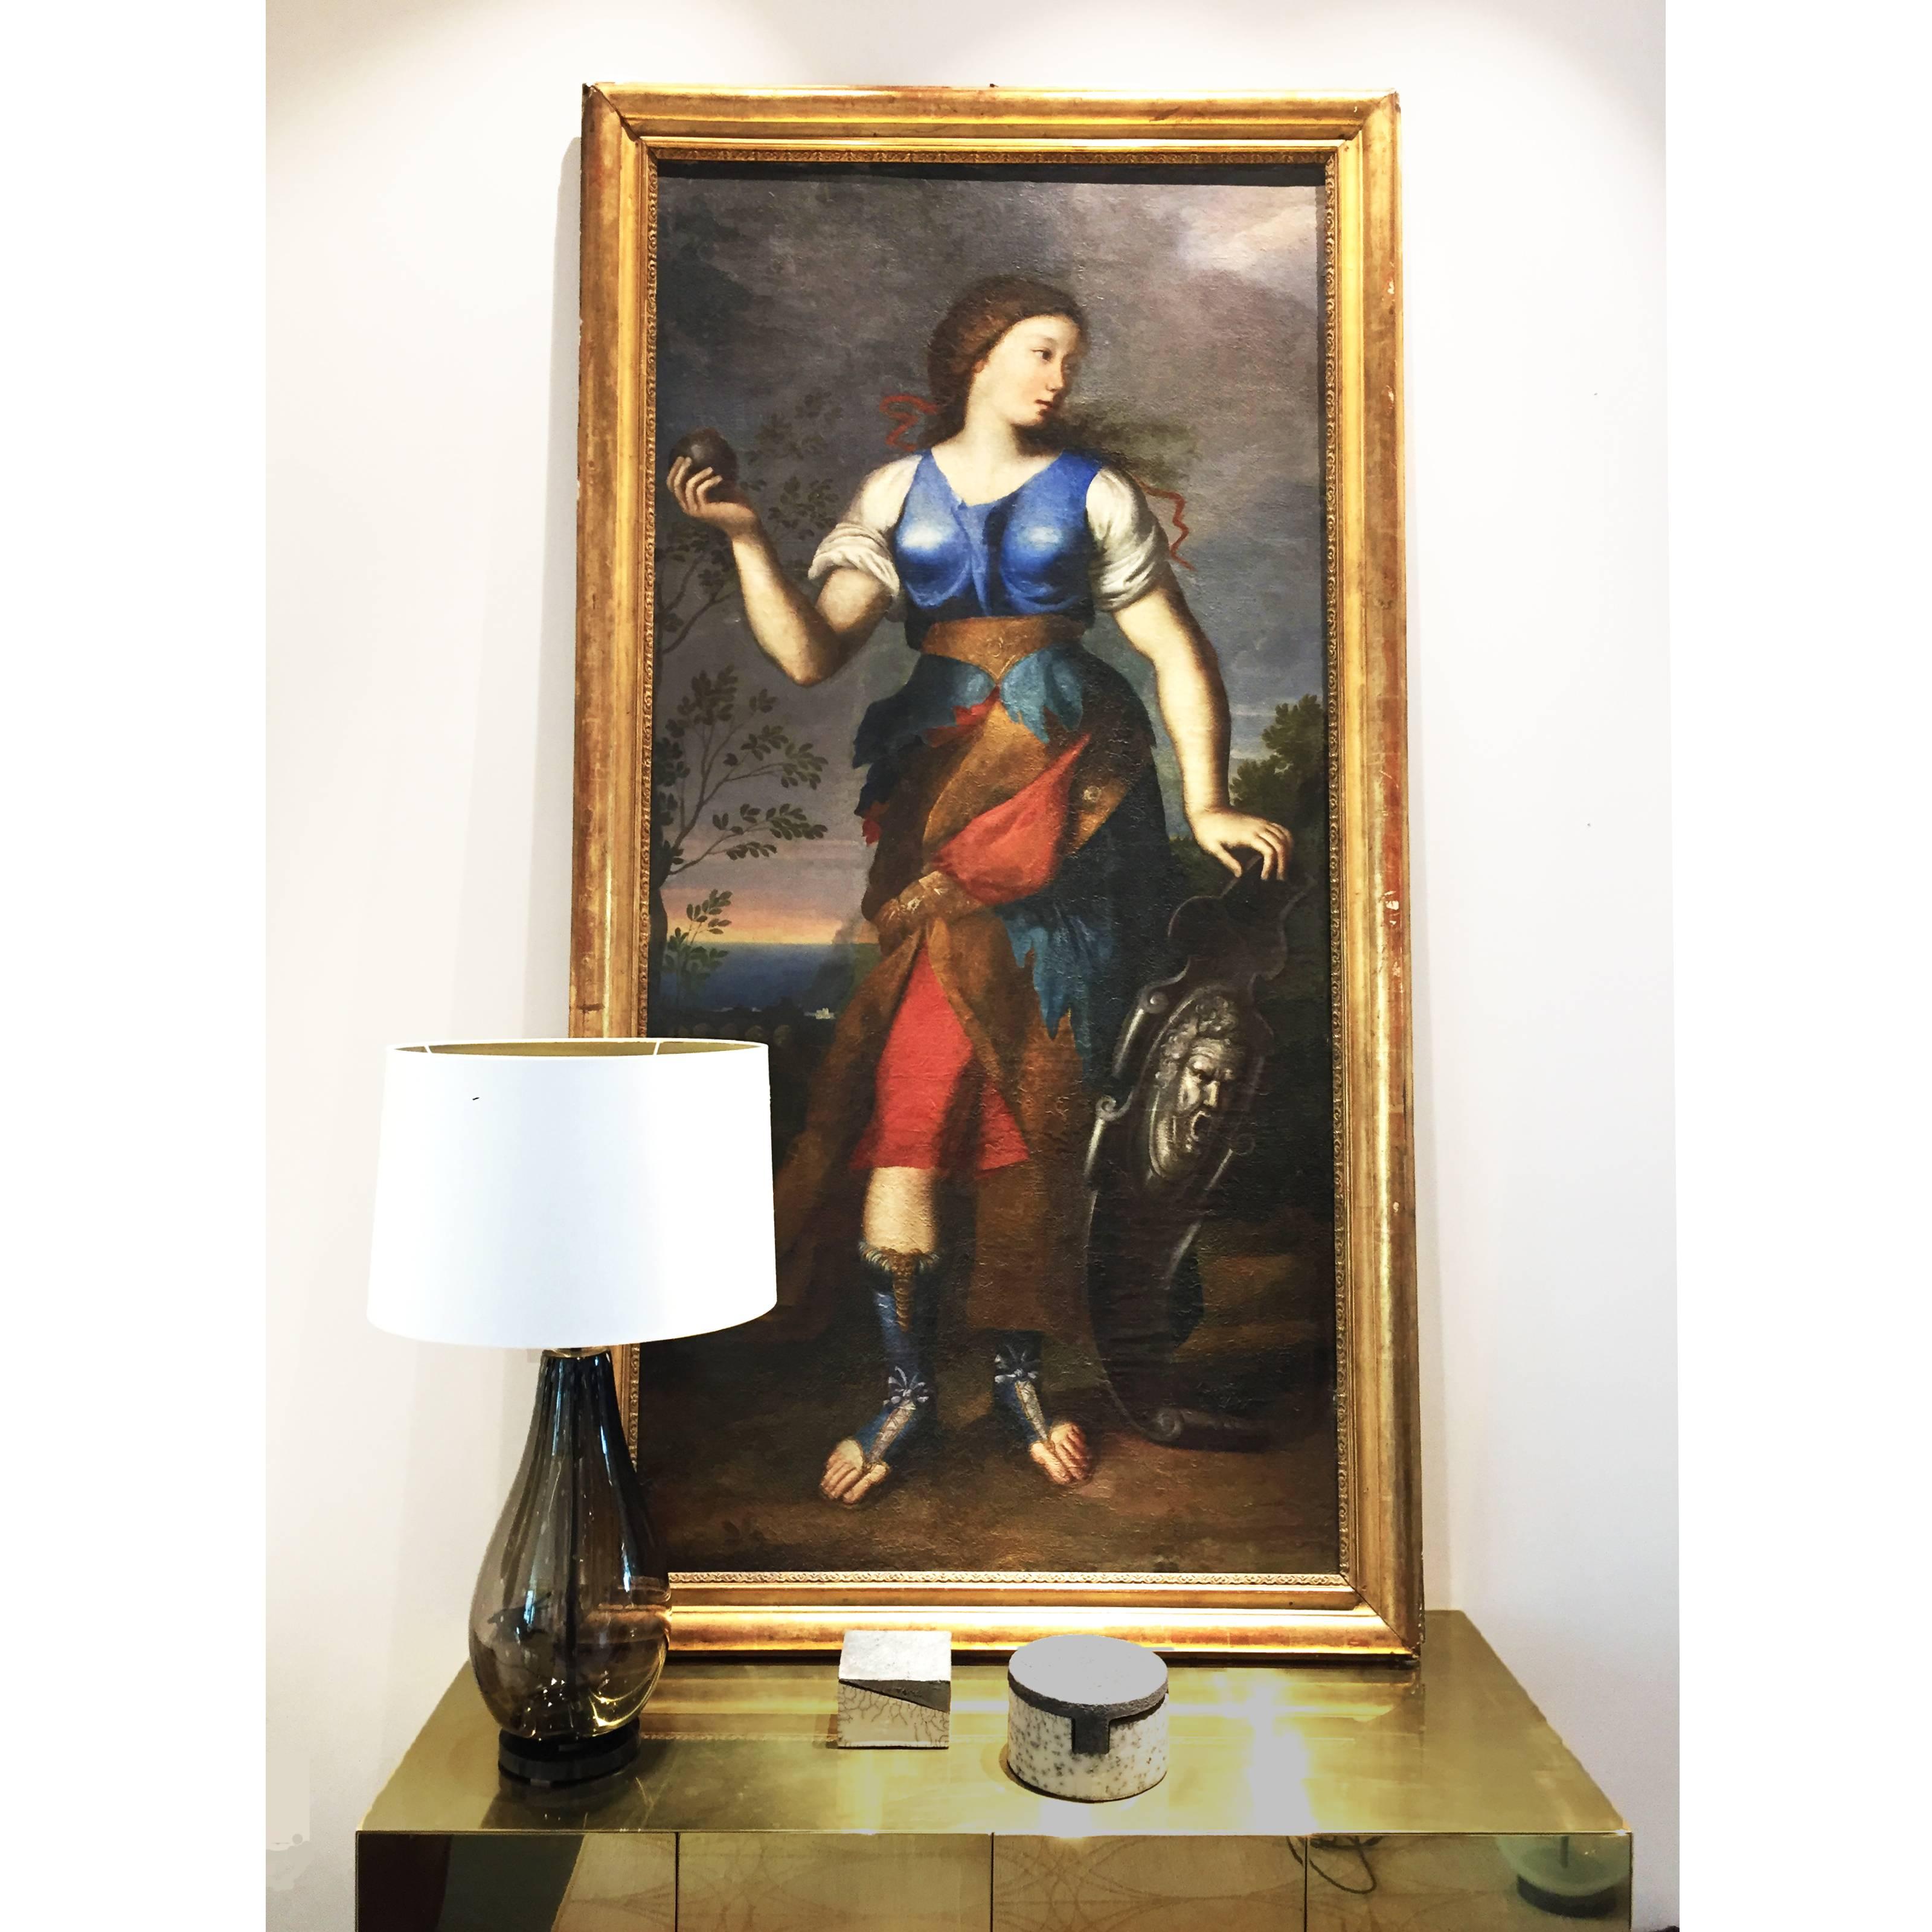 Powerful renaissance oil painting on canvas from late-1600's, featuring Bellona the goddess of war. The painting is skilfully created using oil paints to create movement and texture on its surface, painted by an Italian artist from Emilian School -